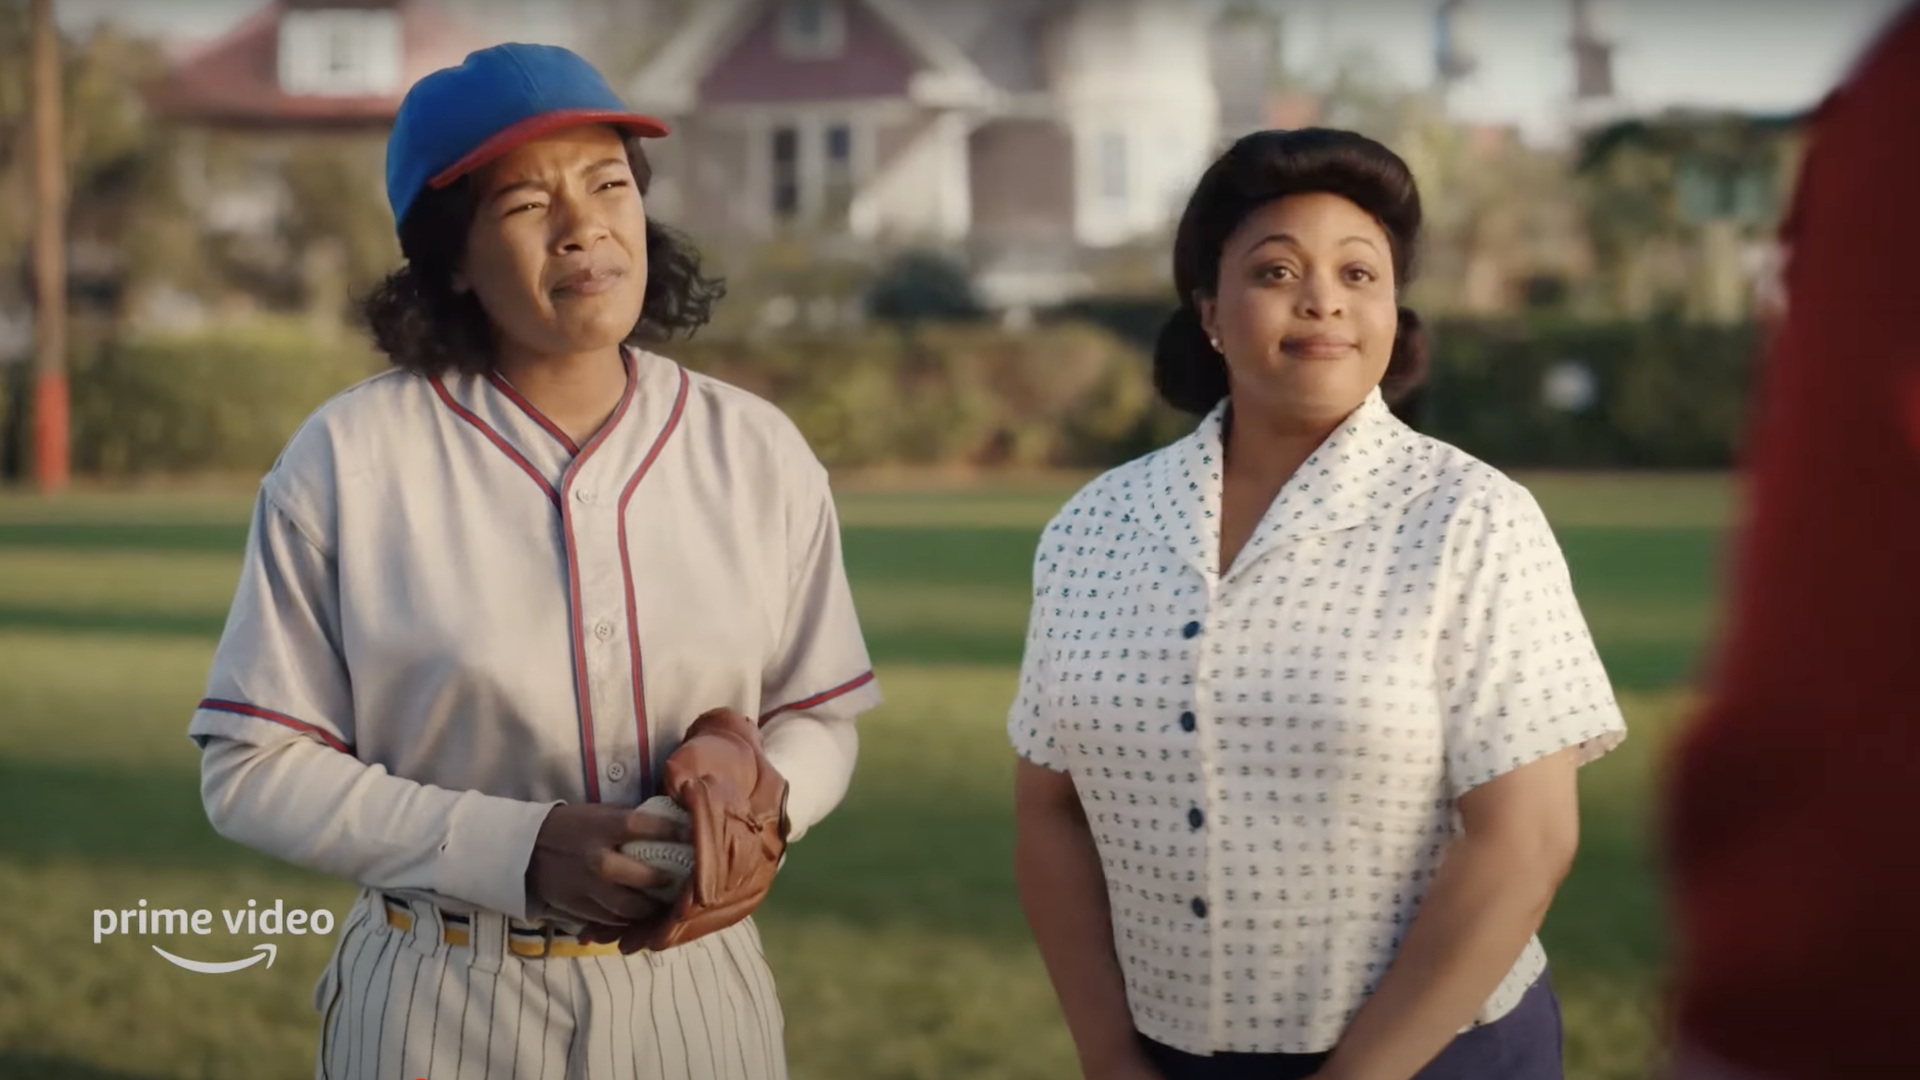 Two women stand on a baseball pitch, one holding a baseball.